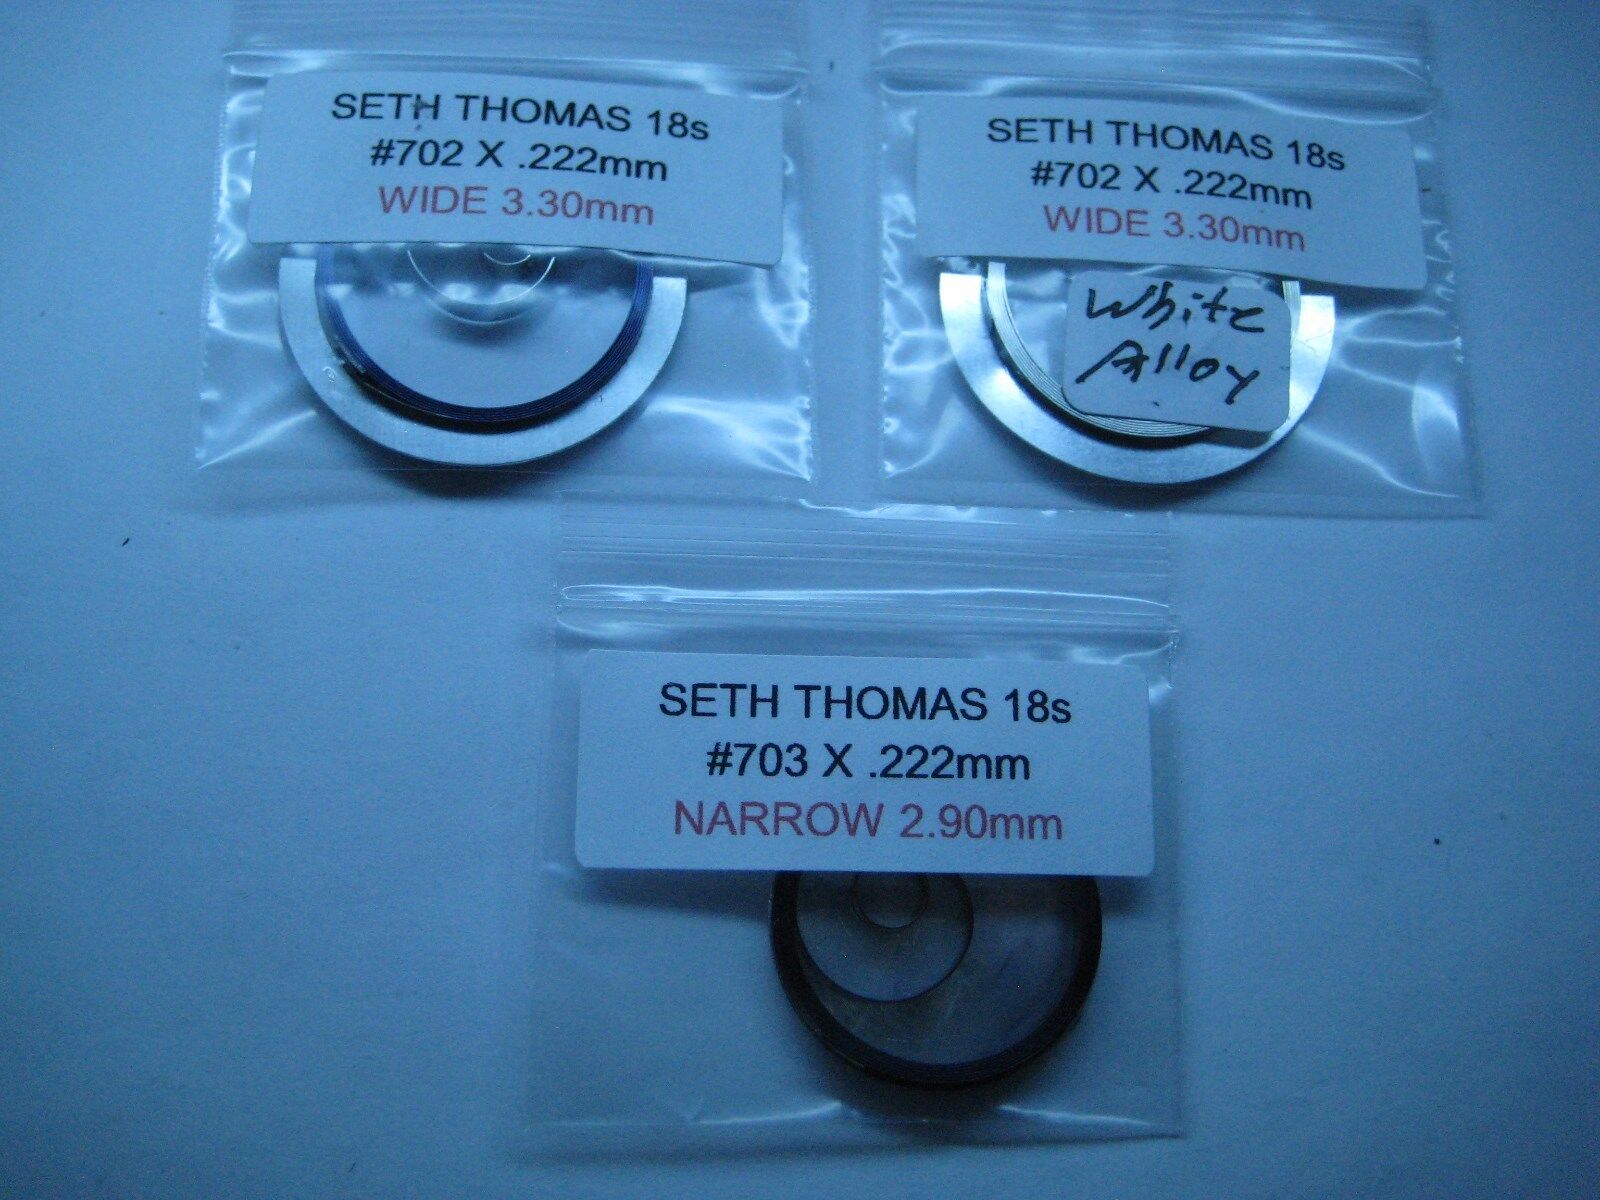 SETH THOMAS 18s  #703 NARROW ( 2.90mm ) / #702 WIDE ( 3.30mm )  STEEL or ALLOY